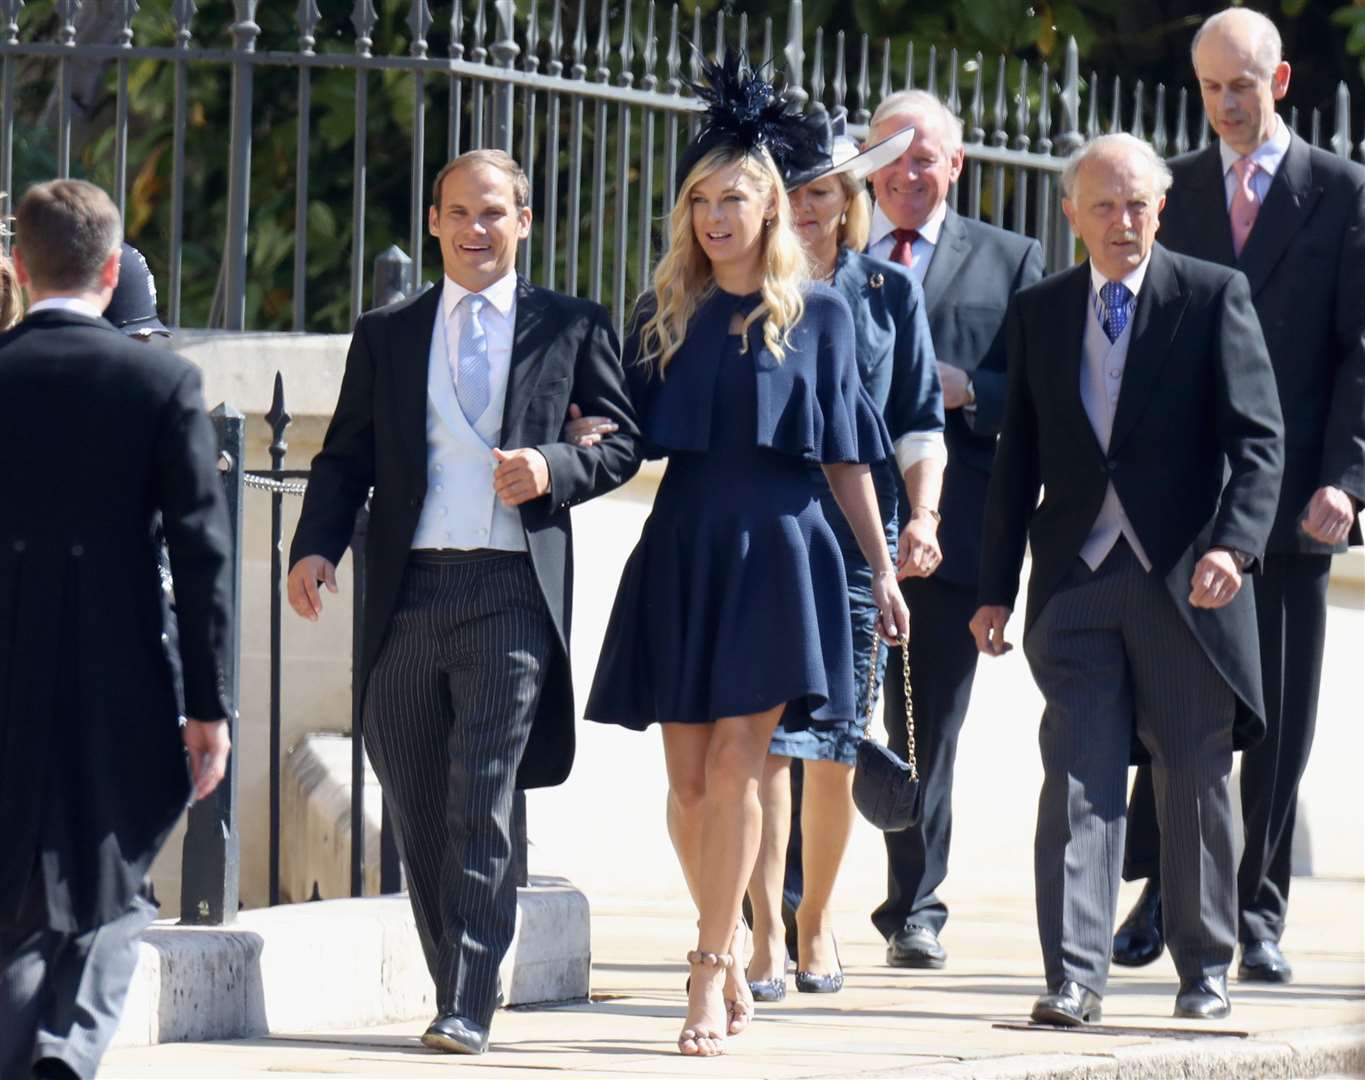 Chelsy Davy pictured attending the wedding of the Duke and Duchess of Sussex (Chris Jackson/PA)